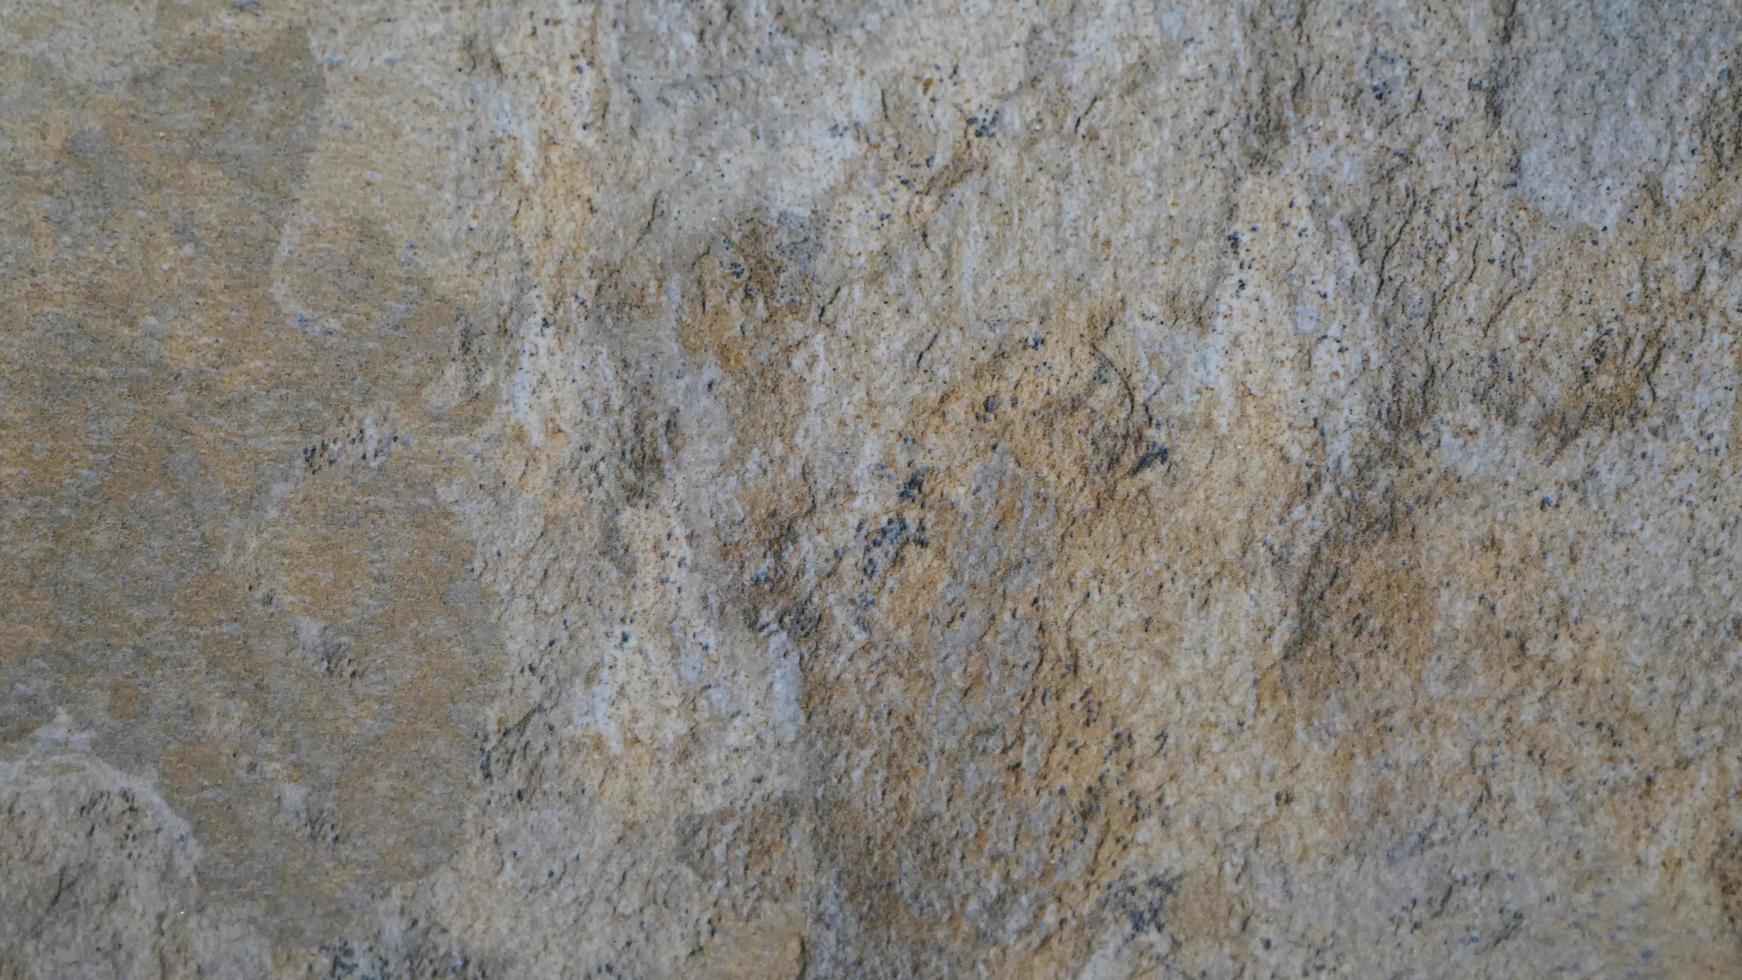 abstract stone marble background. photo